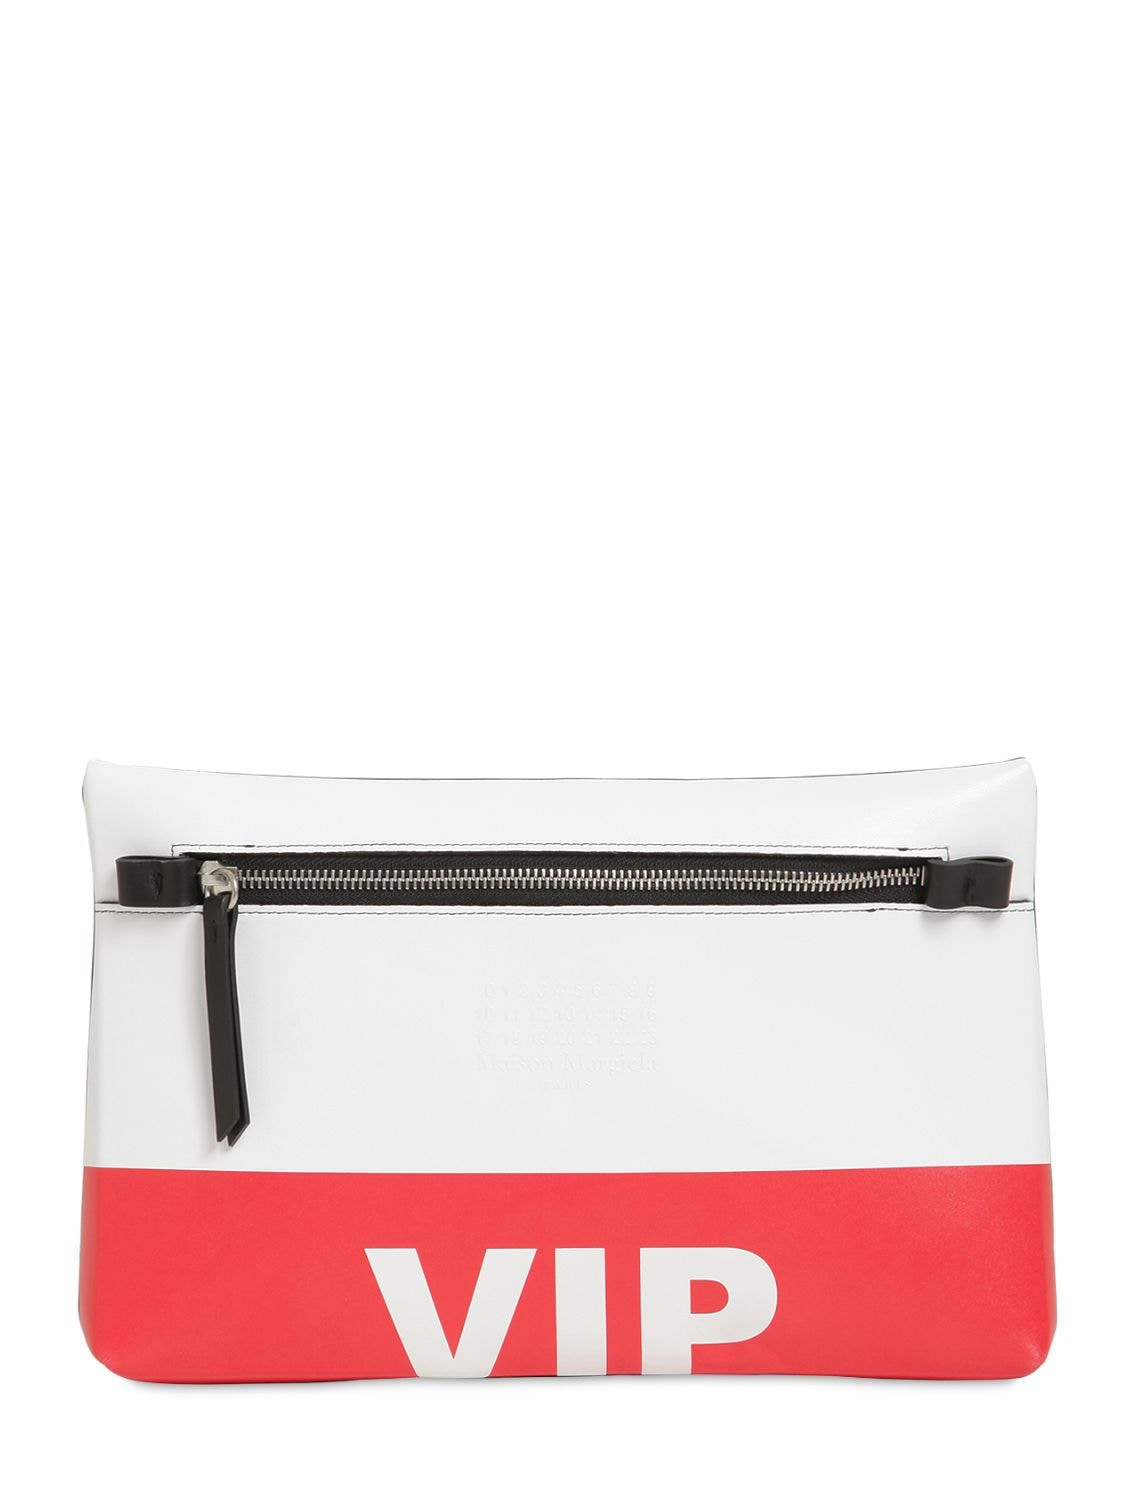 Maison Margiela Vip Leather Pouch In White,red